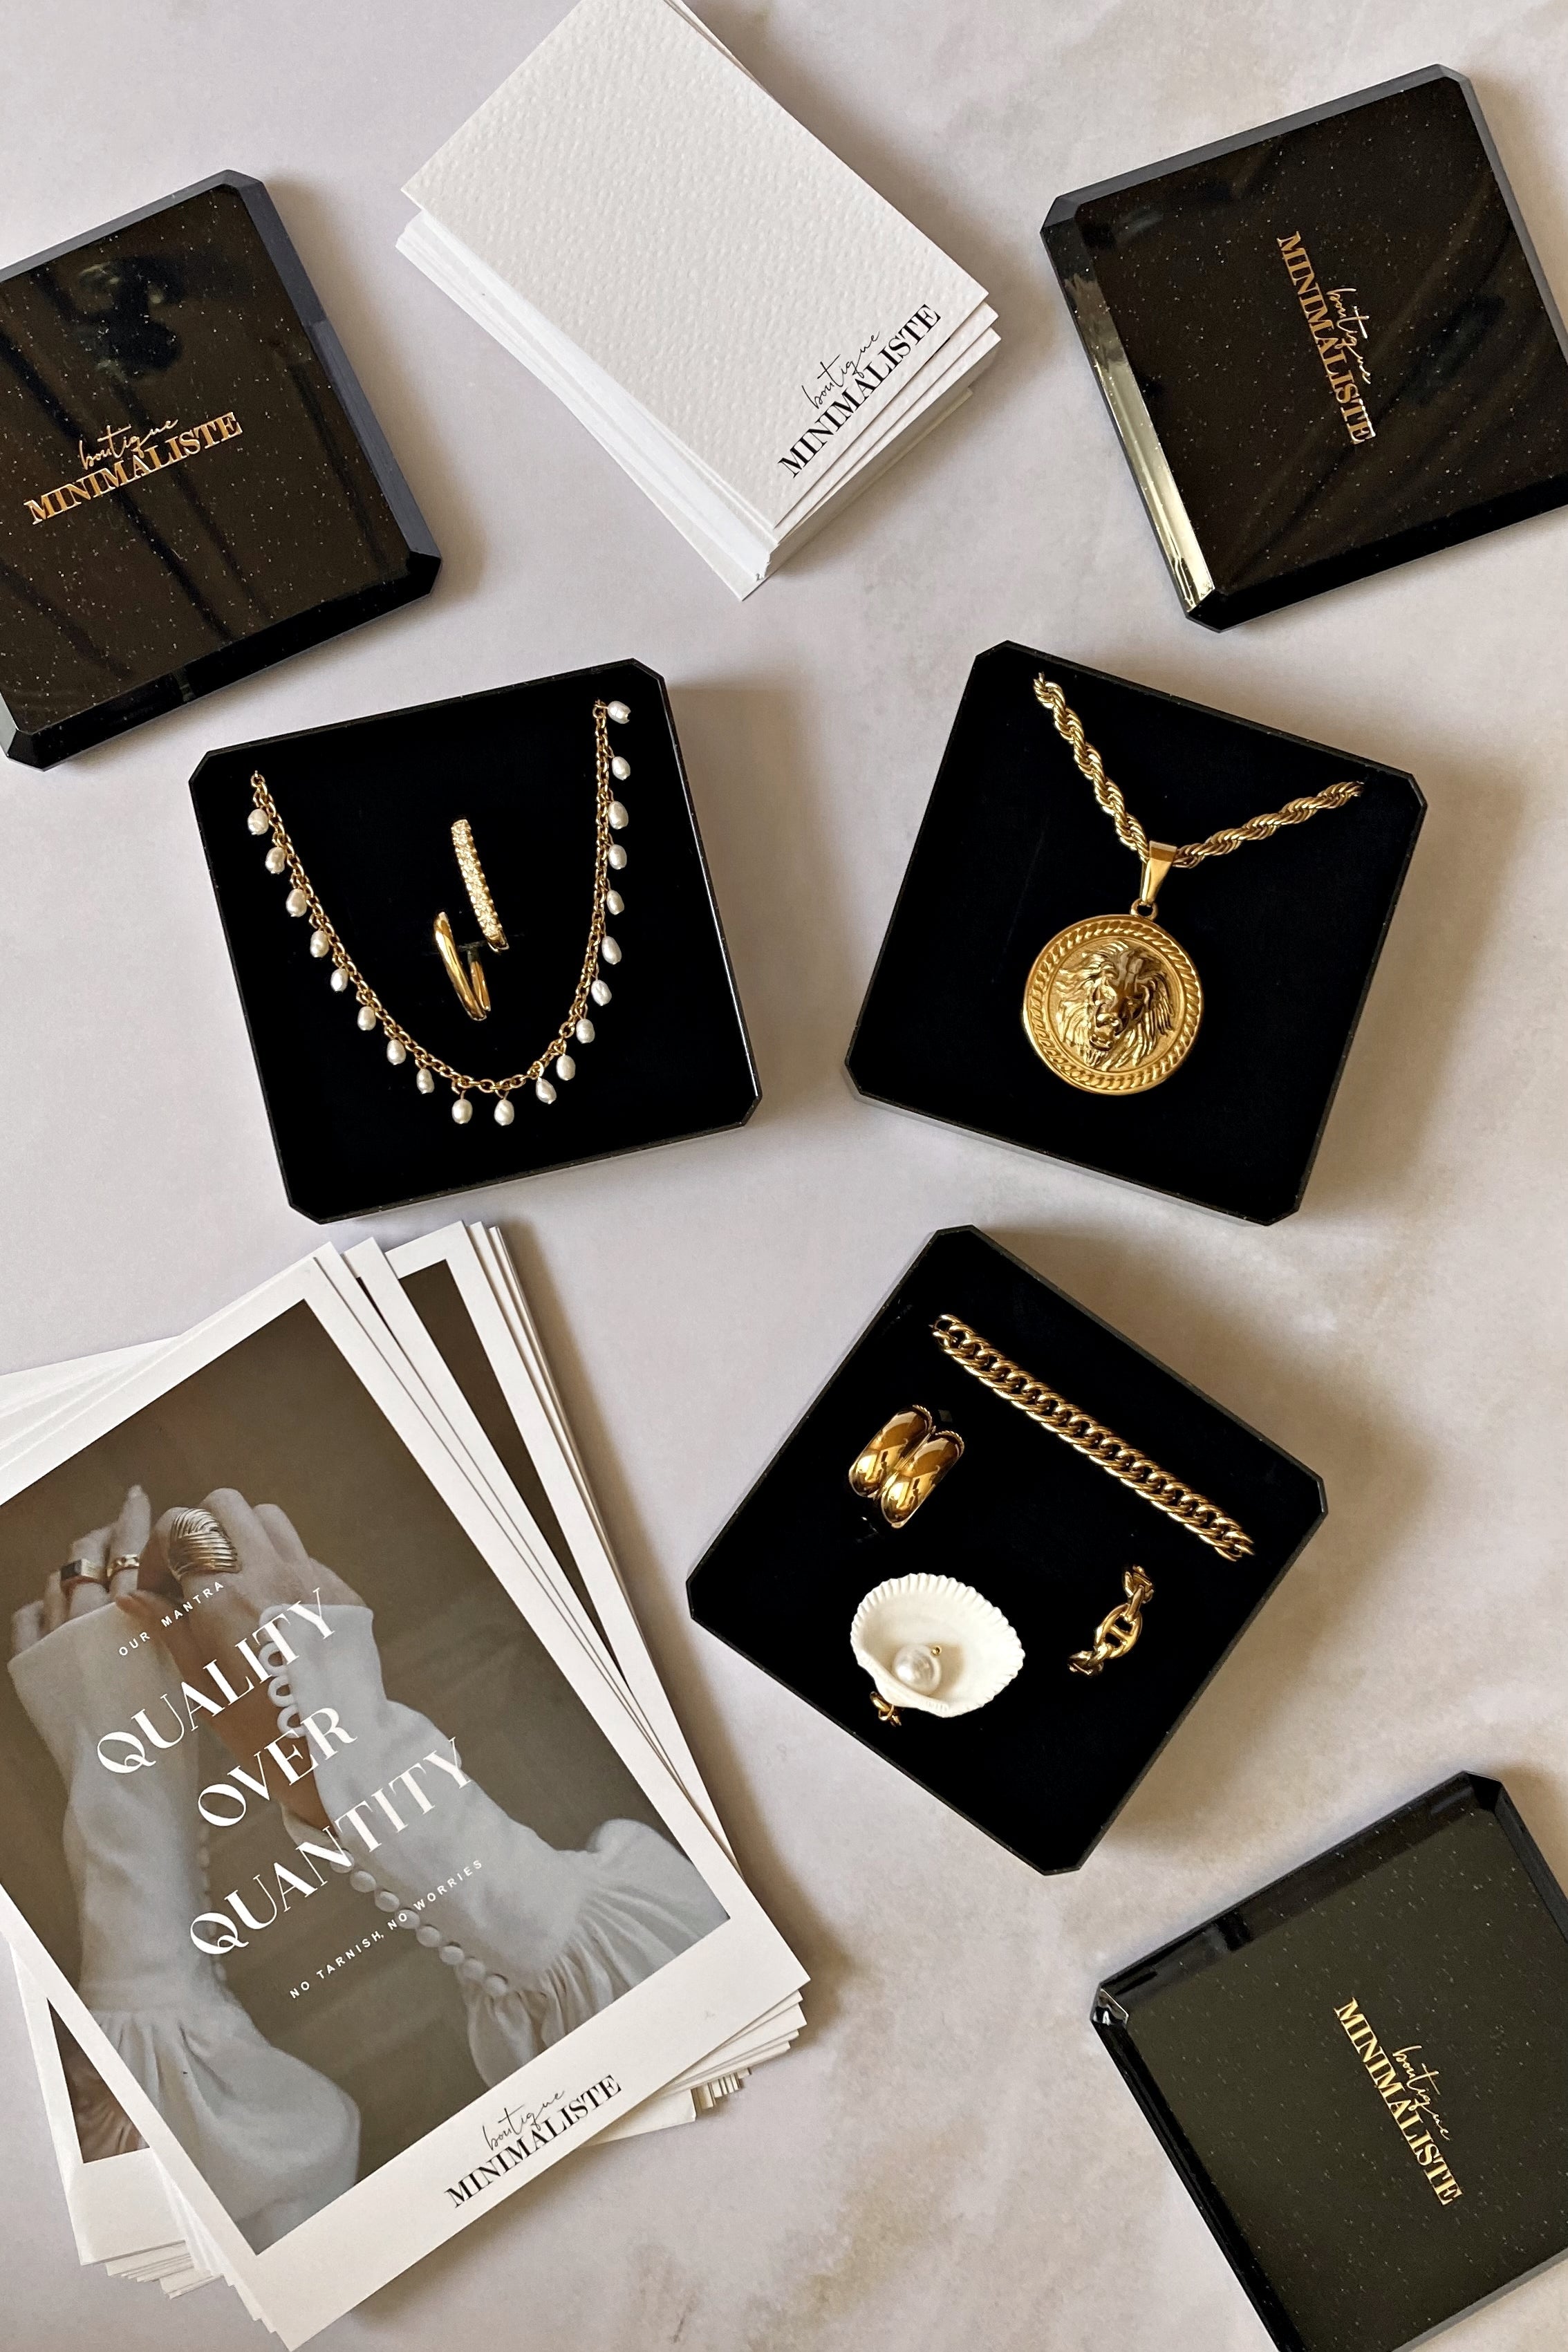 Gift Box - Boutique Minimaliste has waterproof, durable, elegant and vintage inspired jewelry